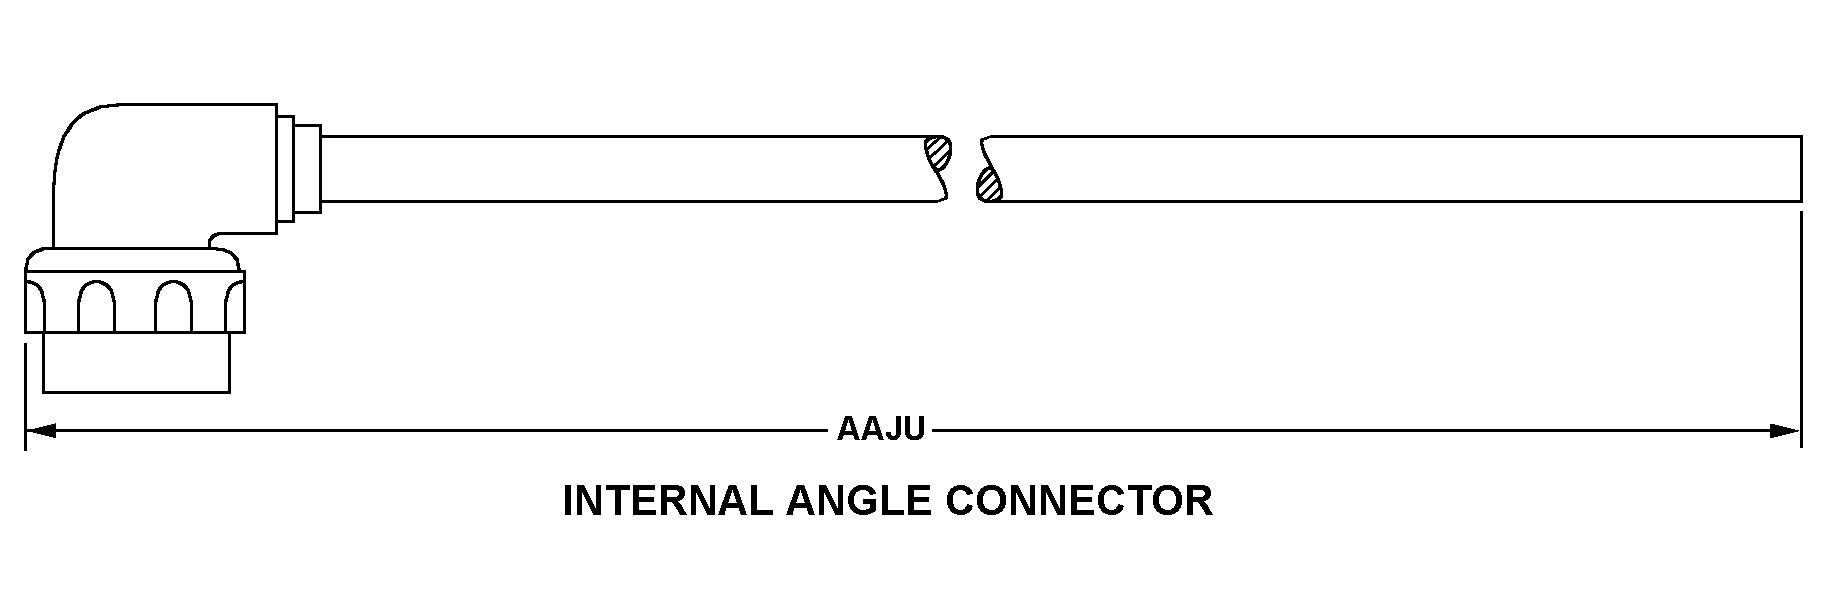 INTERNAL ANGLE CONNECTOR style nsn 5995-01-522-6484